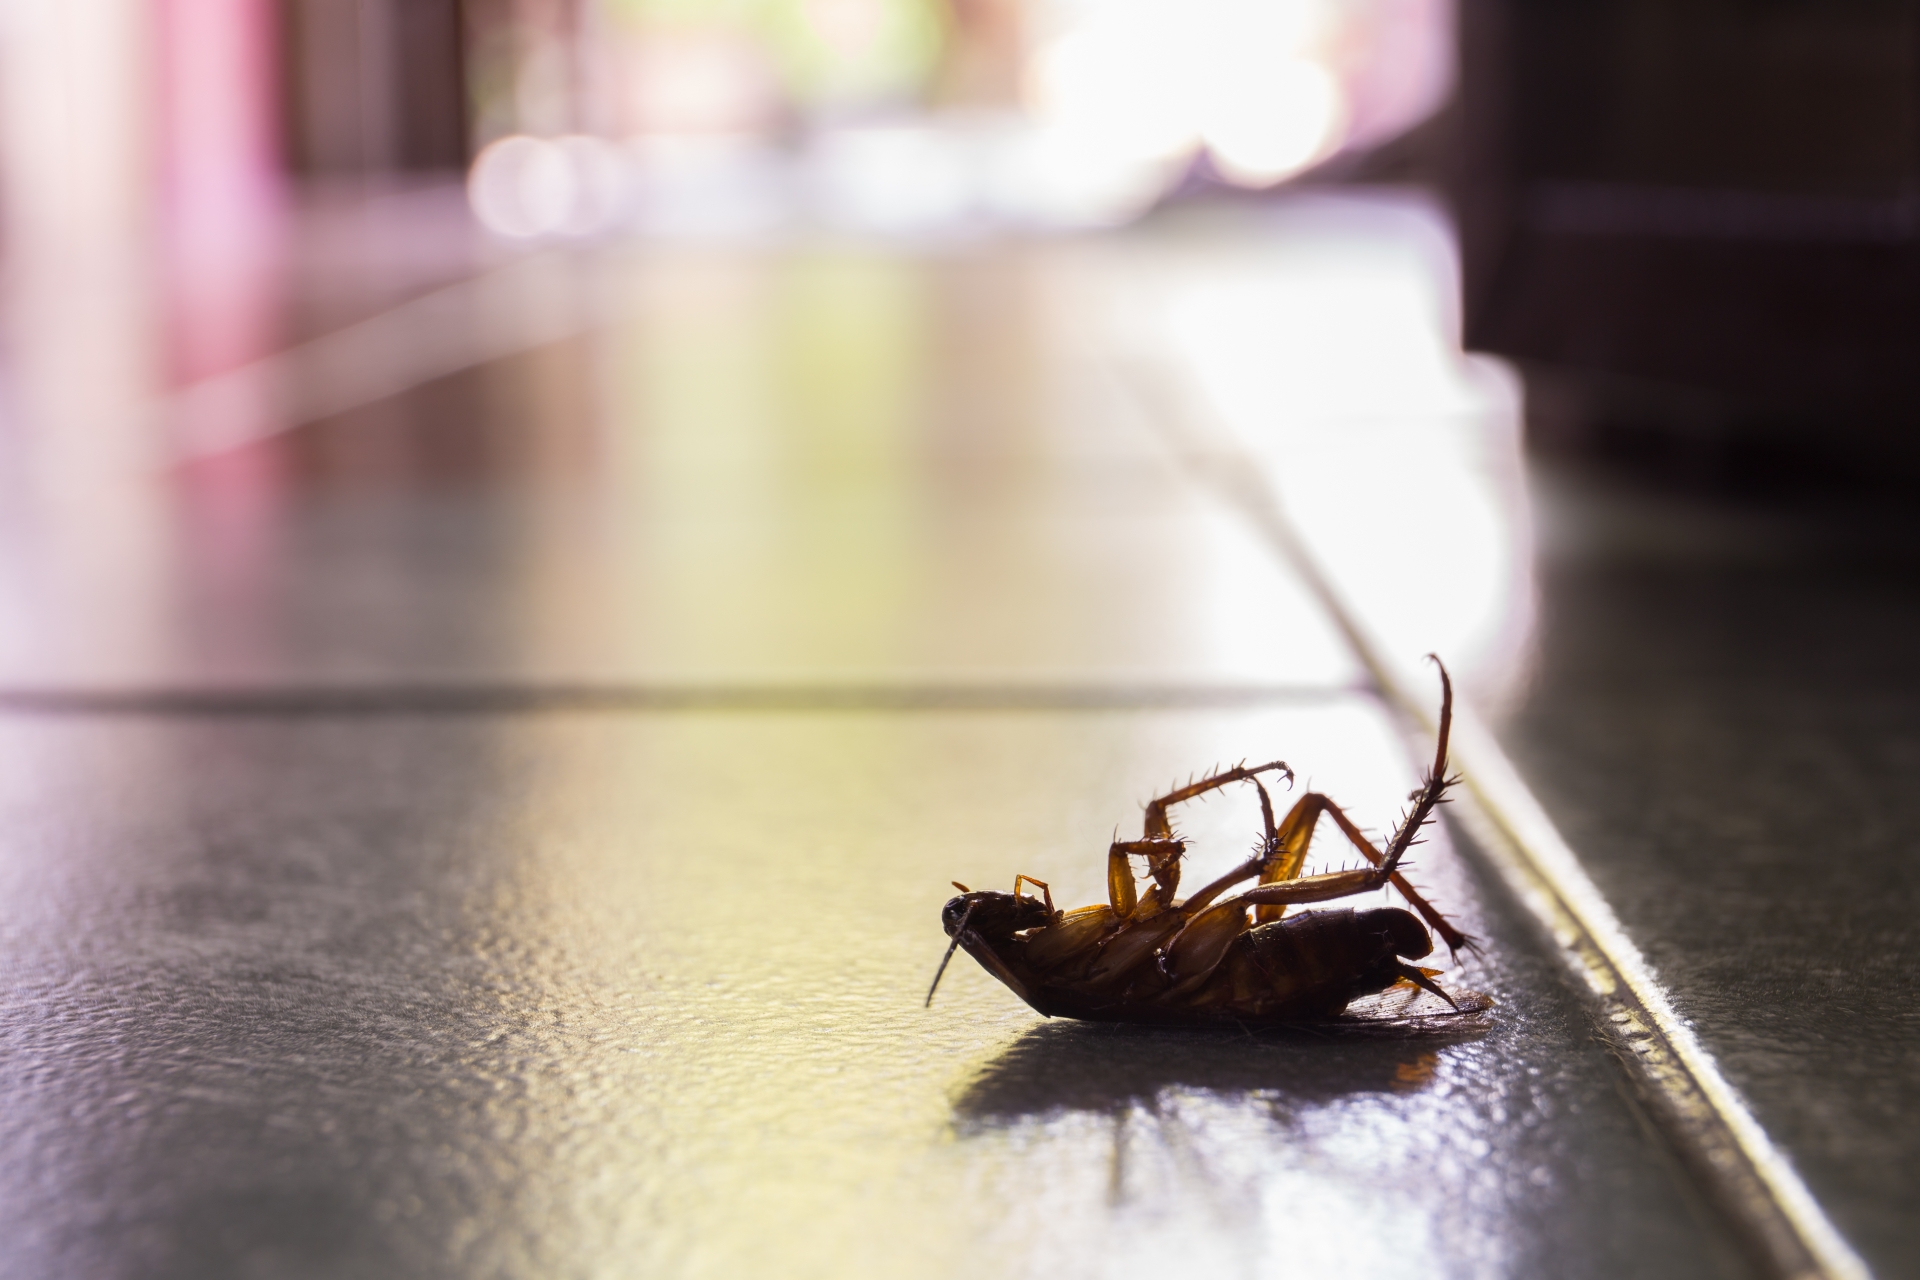 Cockroach Control, Pest Control in Norbury, SW16. Call Now 020 8166 9746